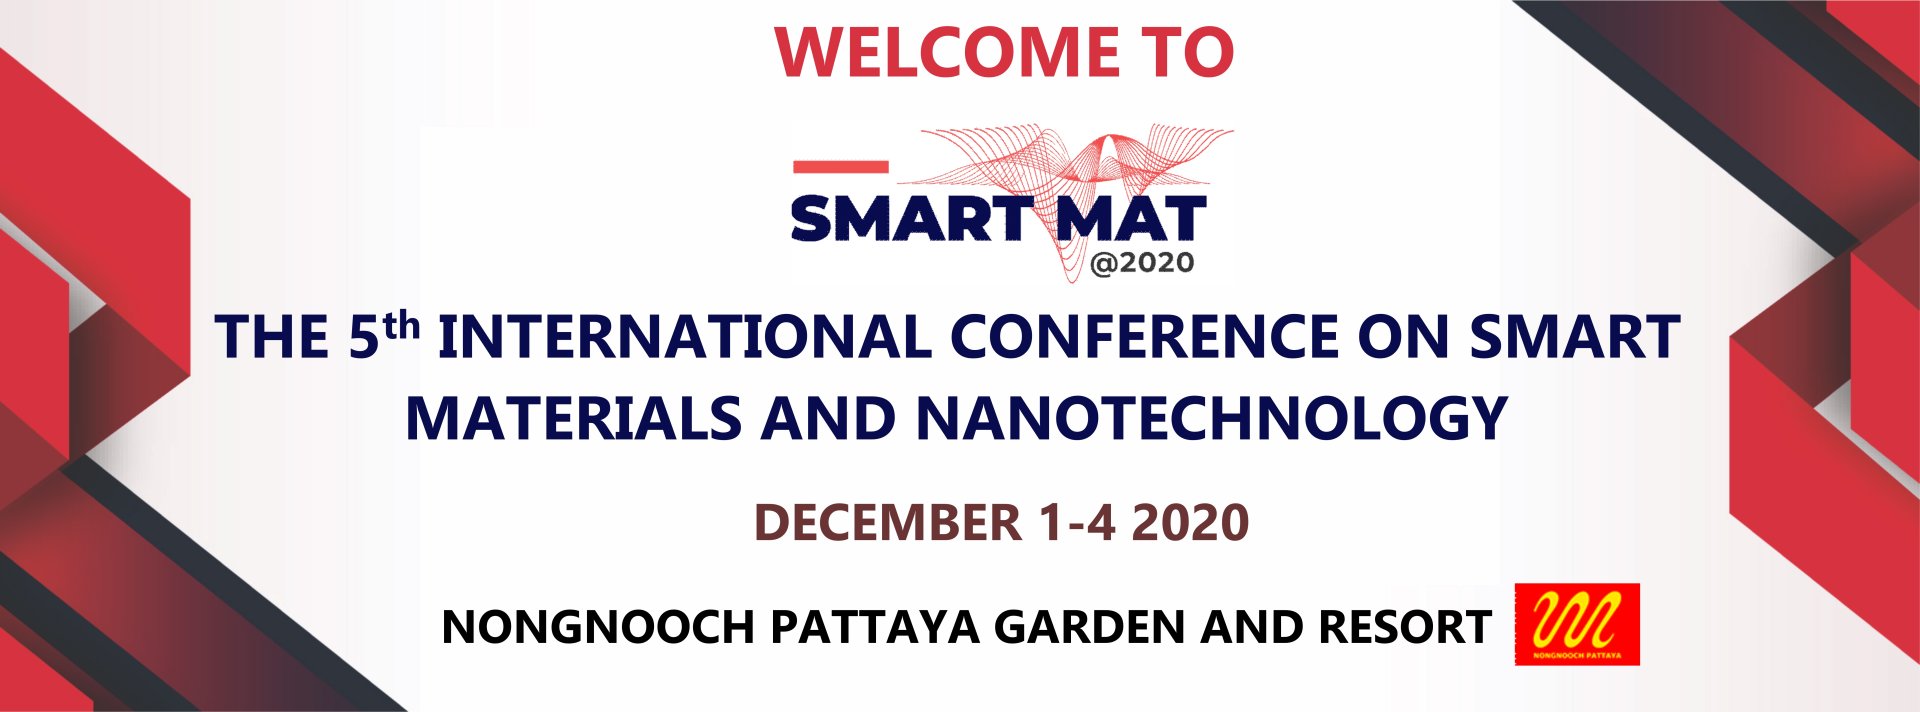 The 5th International Conference on Smart Materials and Nanotechnology (SmartMat@2020)